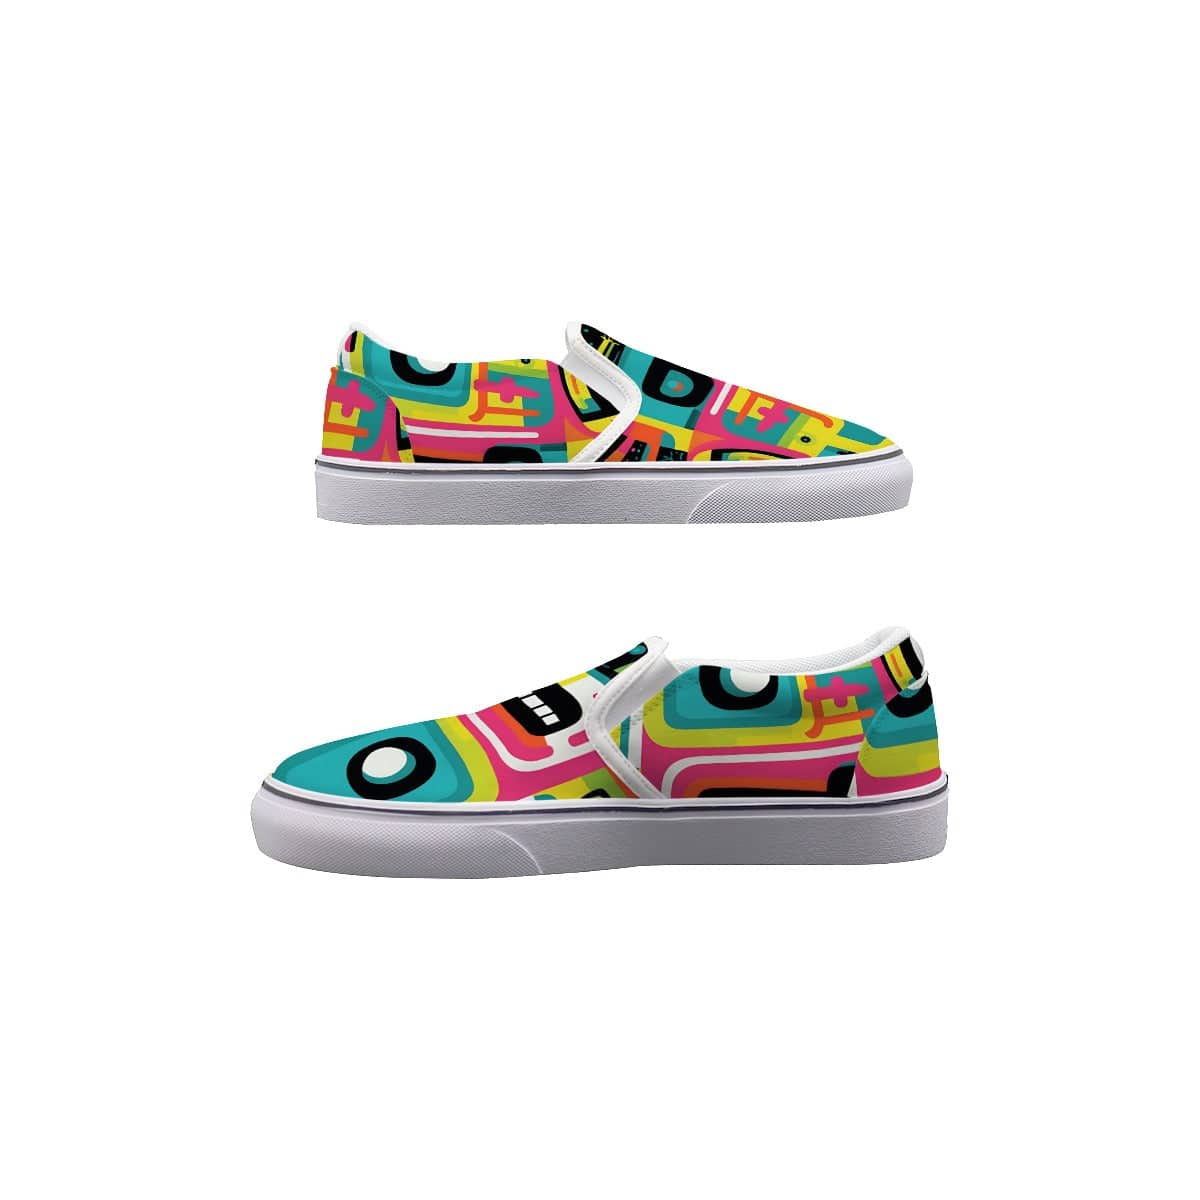 Yoycol Going Places - Women's Slip On Sneakers